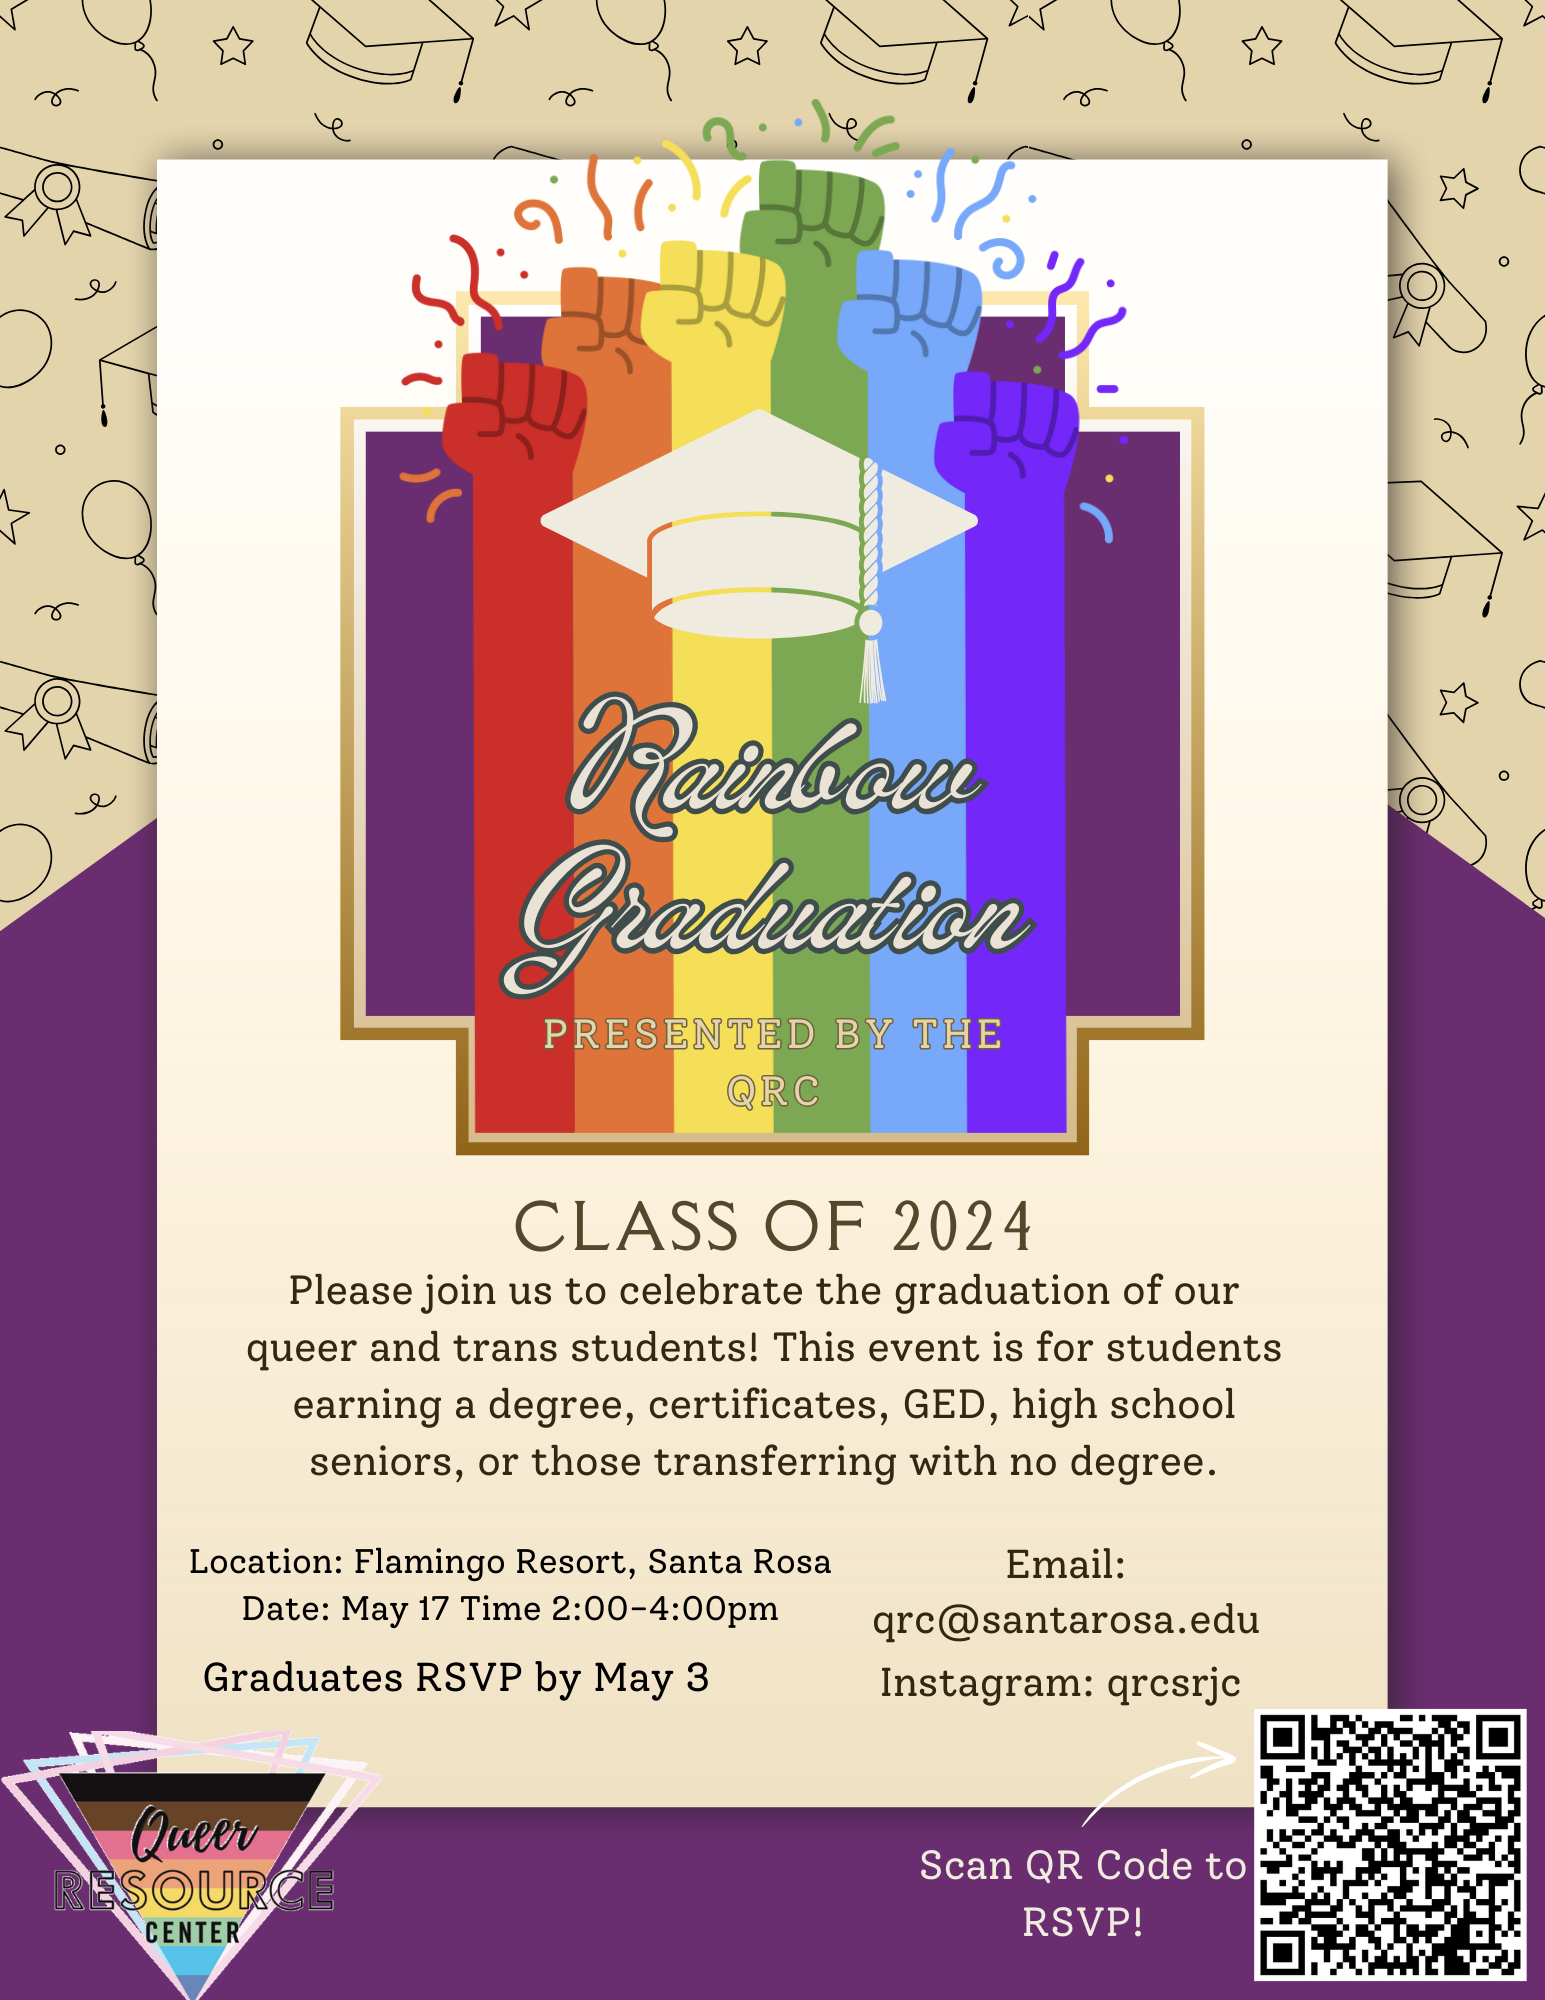 Rainbow Graduation Class of 2024 Please join us to celebrate the graduation of our queer and trans students! This event is for students earning a degree, certificates, GED, highschool seniors, or those transferring with no degree. Location: Flamingo Resort, Santa Rosa. Date May 17. Time: 2:00-4:00pm. Graduates RSVP by May 3. Email: qrc@santarosa.edu Instagram: qrcsrjc RSVP https://docs.google.com/forms/d/e/1FAIpQLSdHd_BLs_I8gff4Ag1dXxwybdCYTdyNu7_GImafn51GjocG4w/viewform